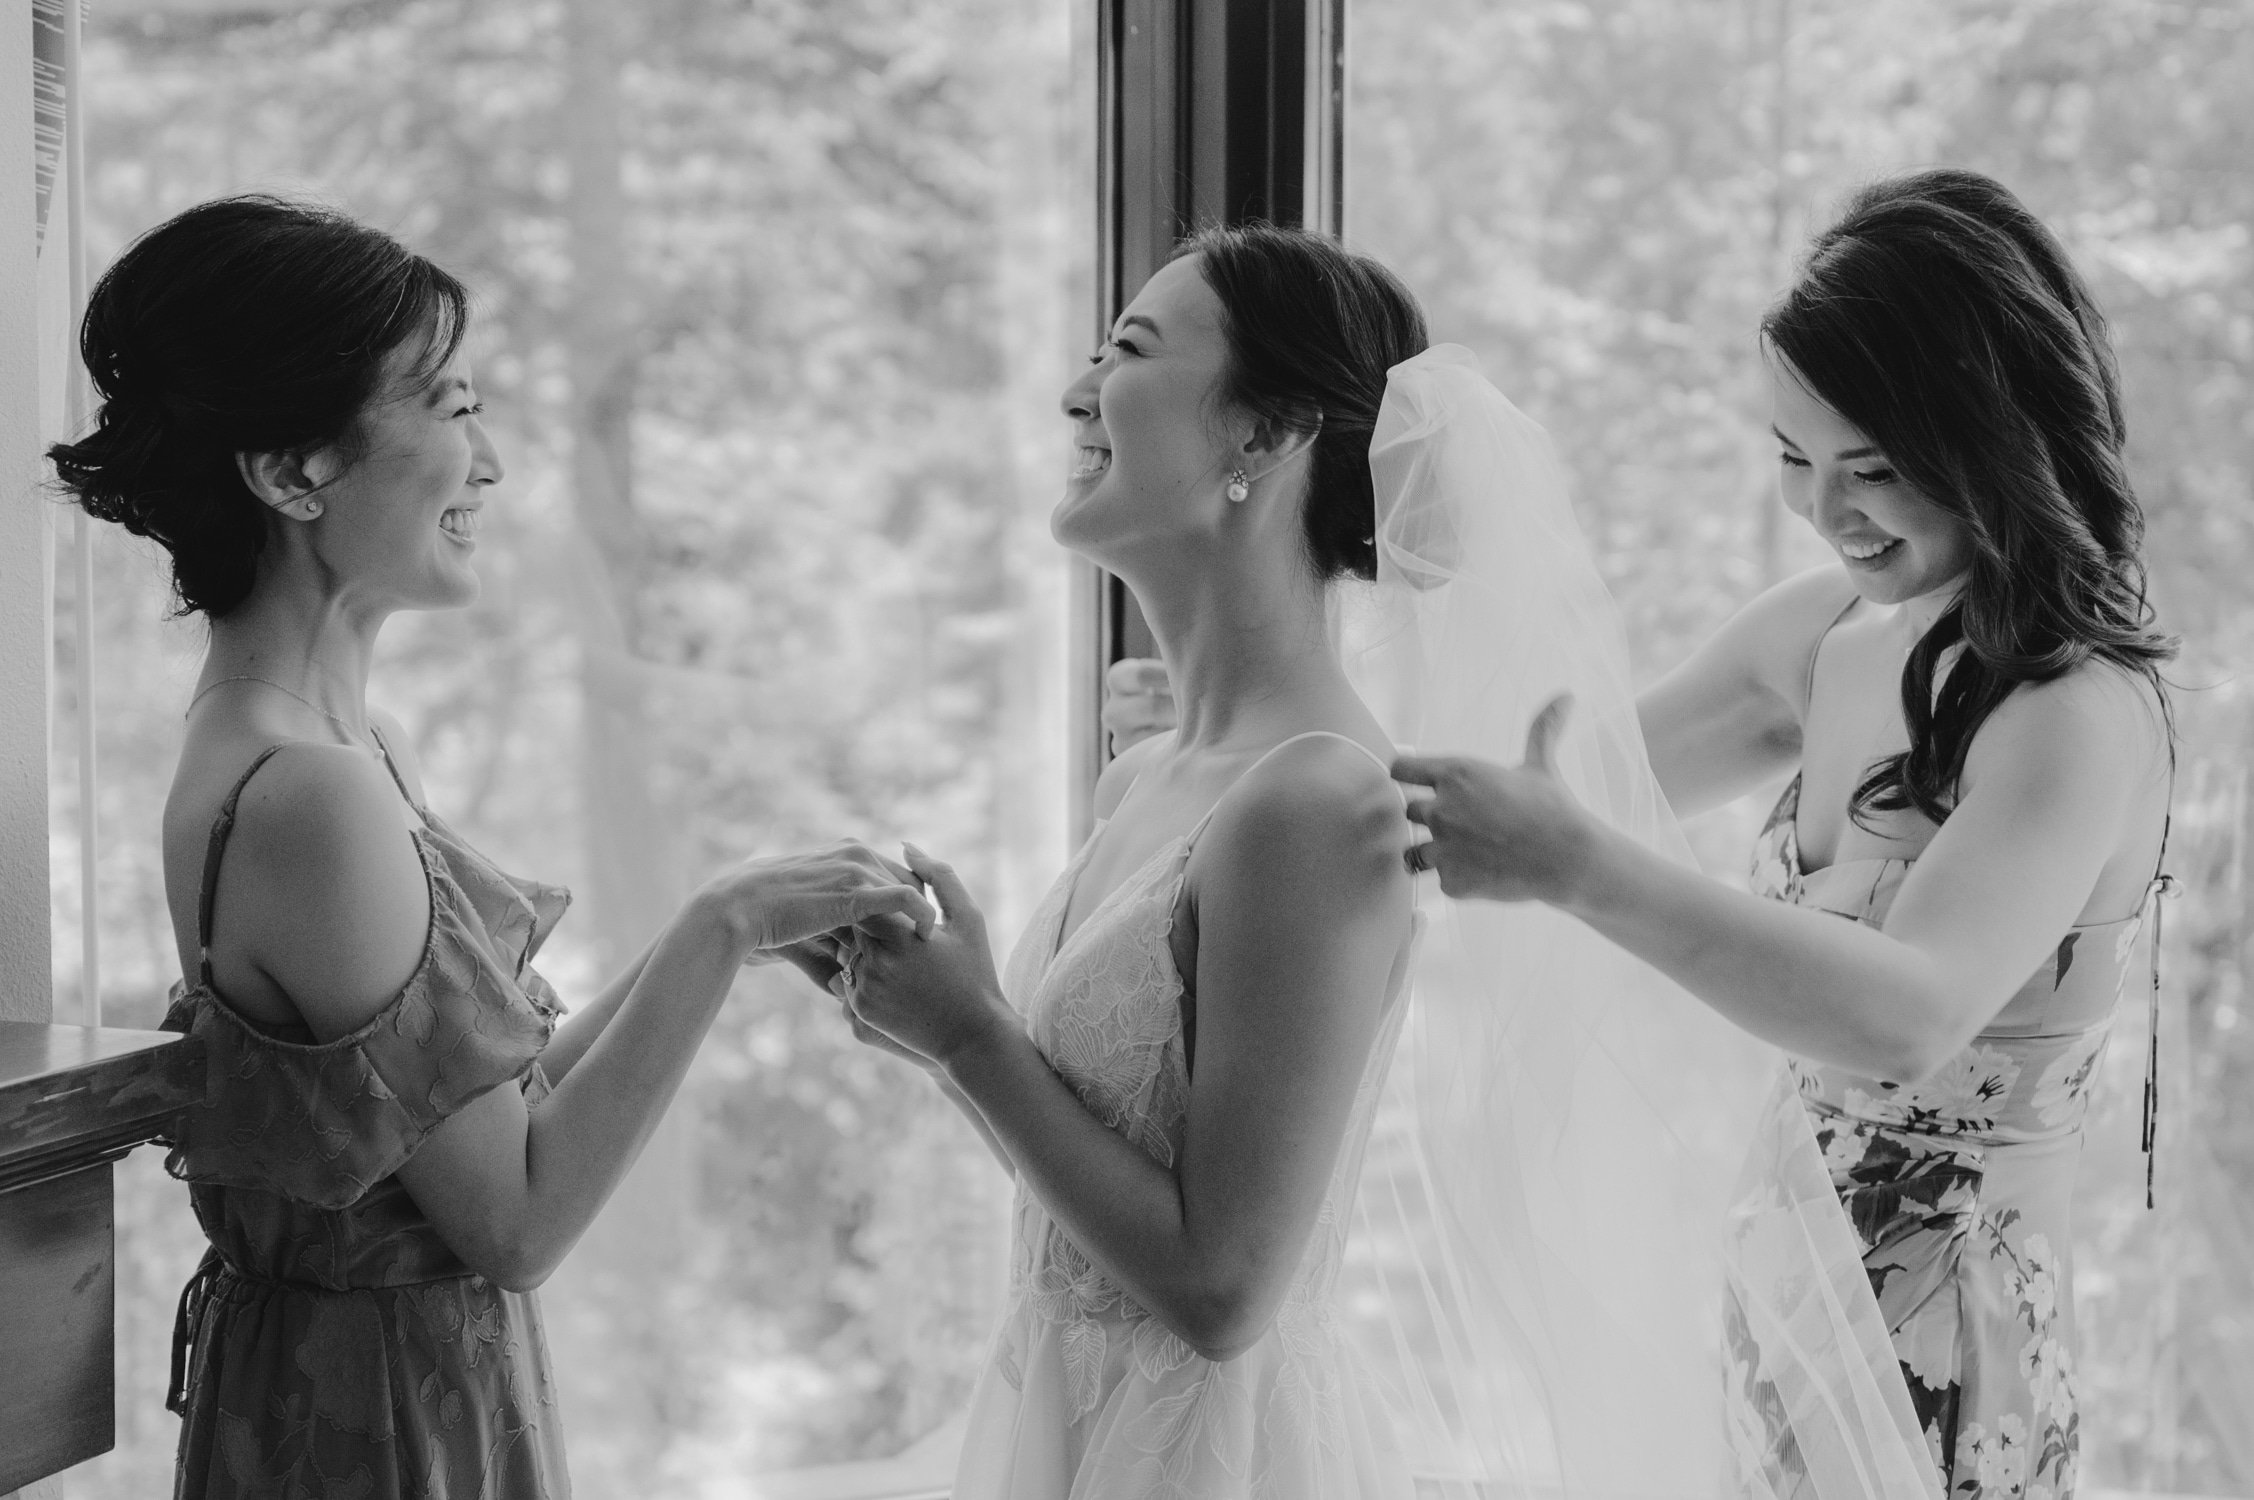 olympic valley stables wedding, photo of the bride and her bridesmaids happily preparing for the wedding